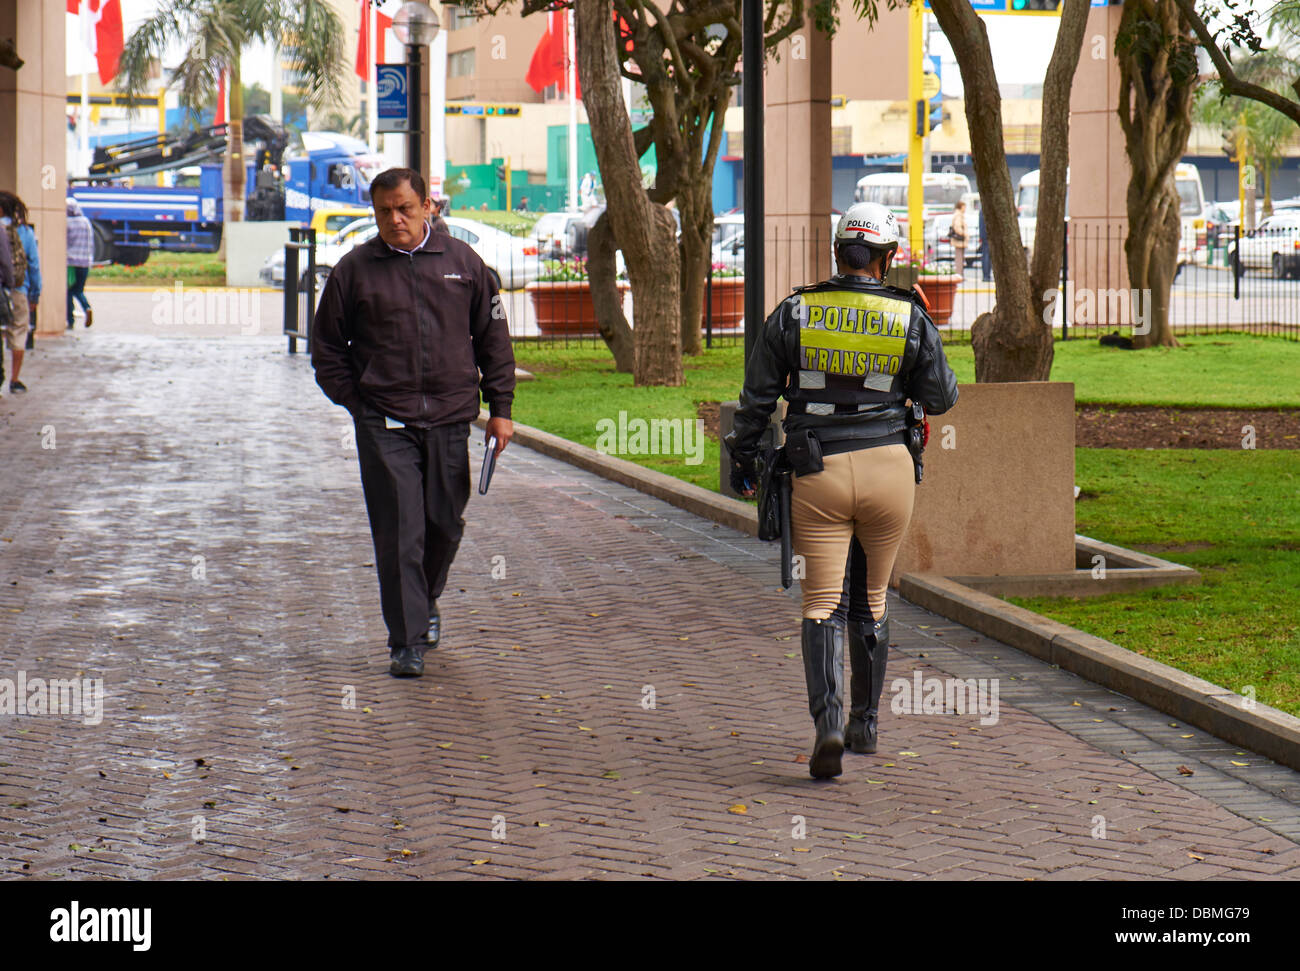 Police Woman In The Miraflores district in Lima, Peru. Stock Photo